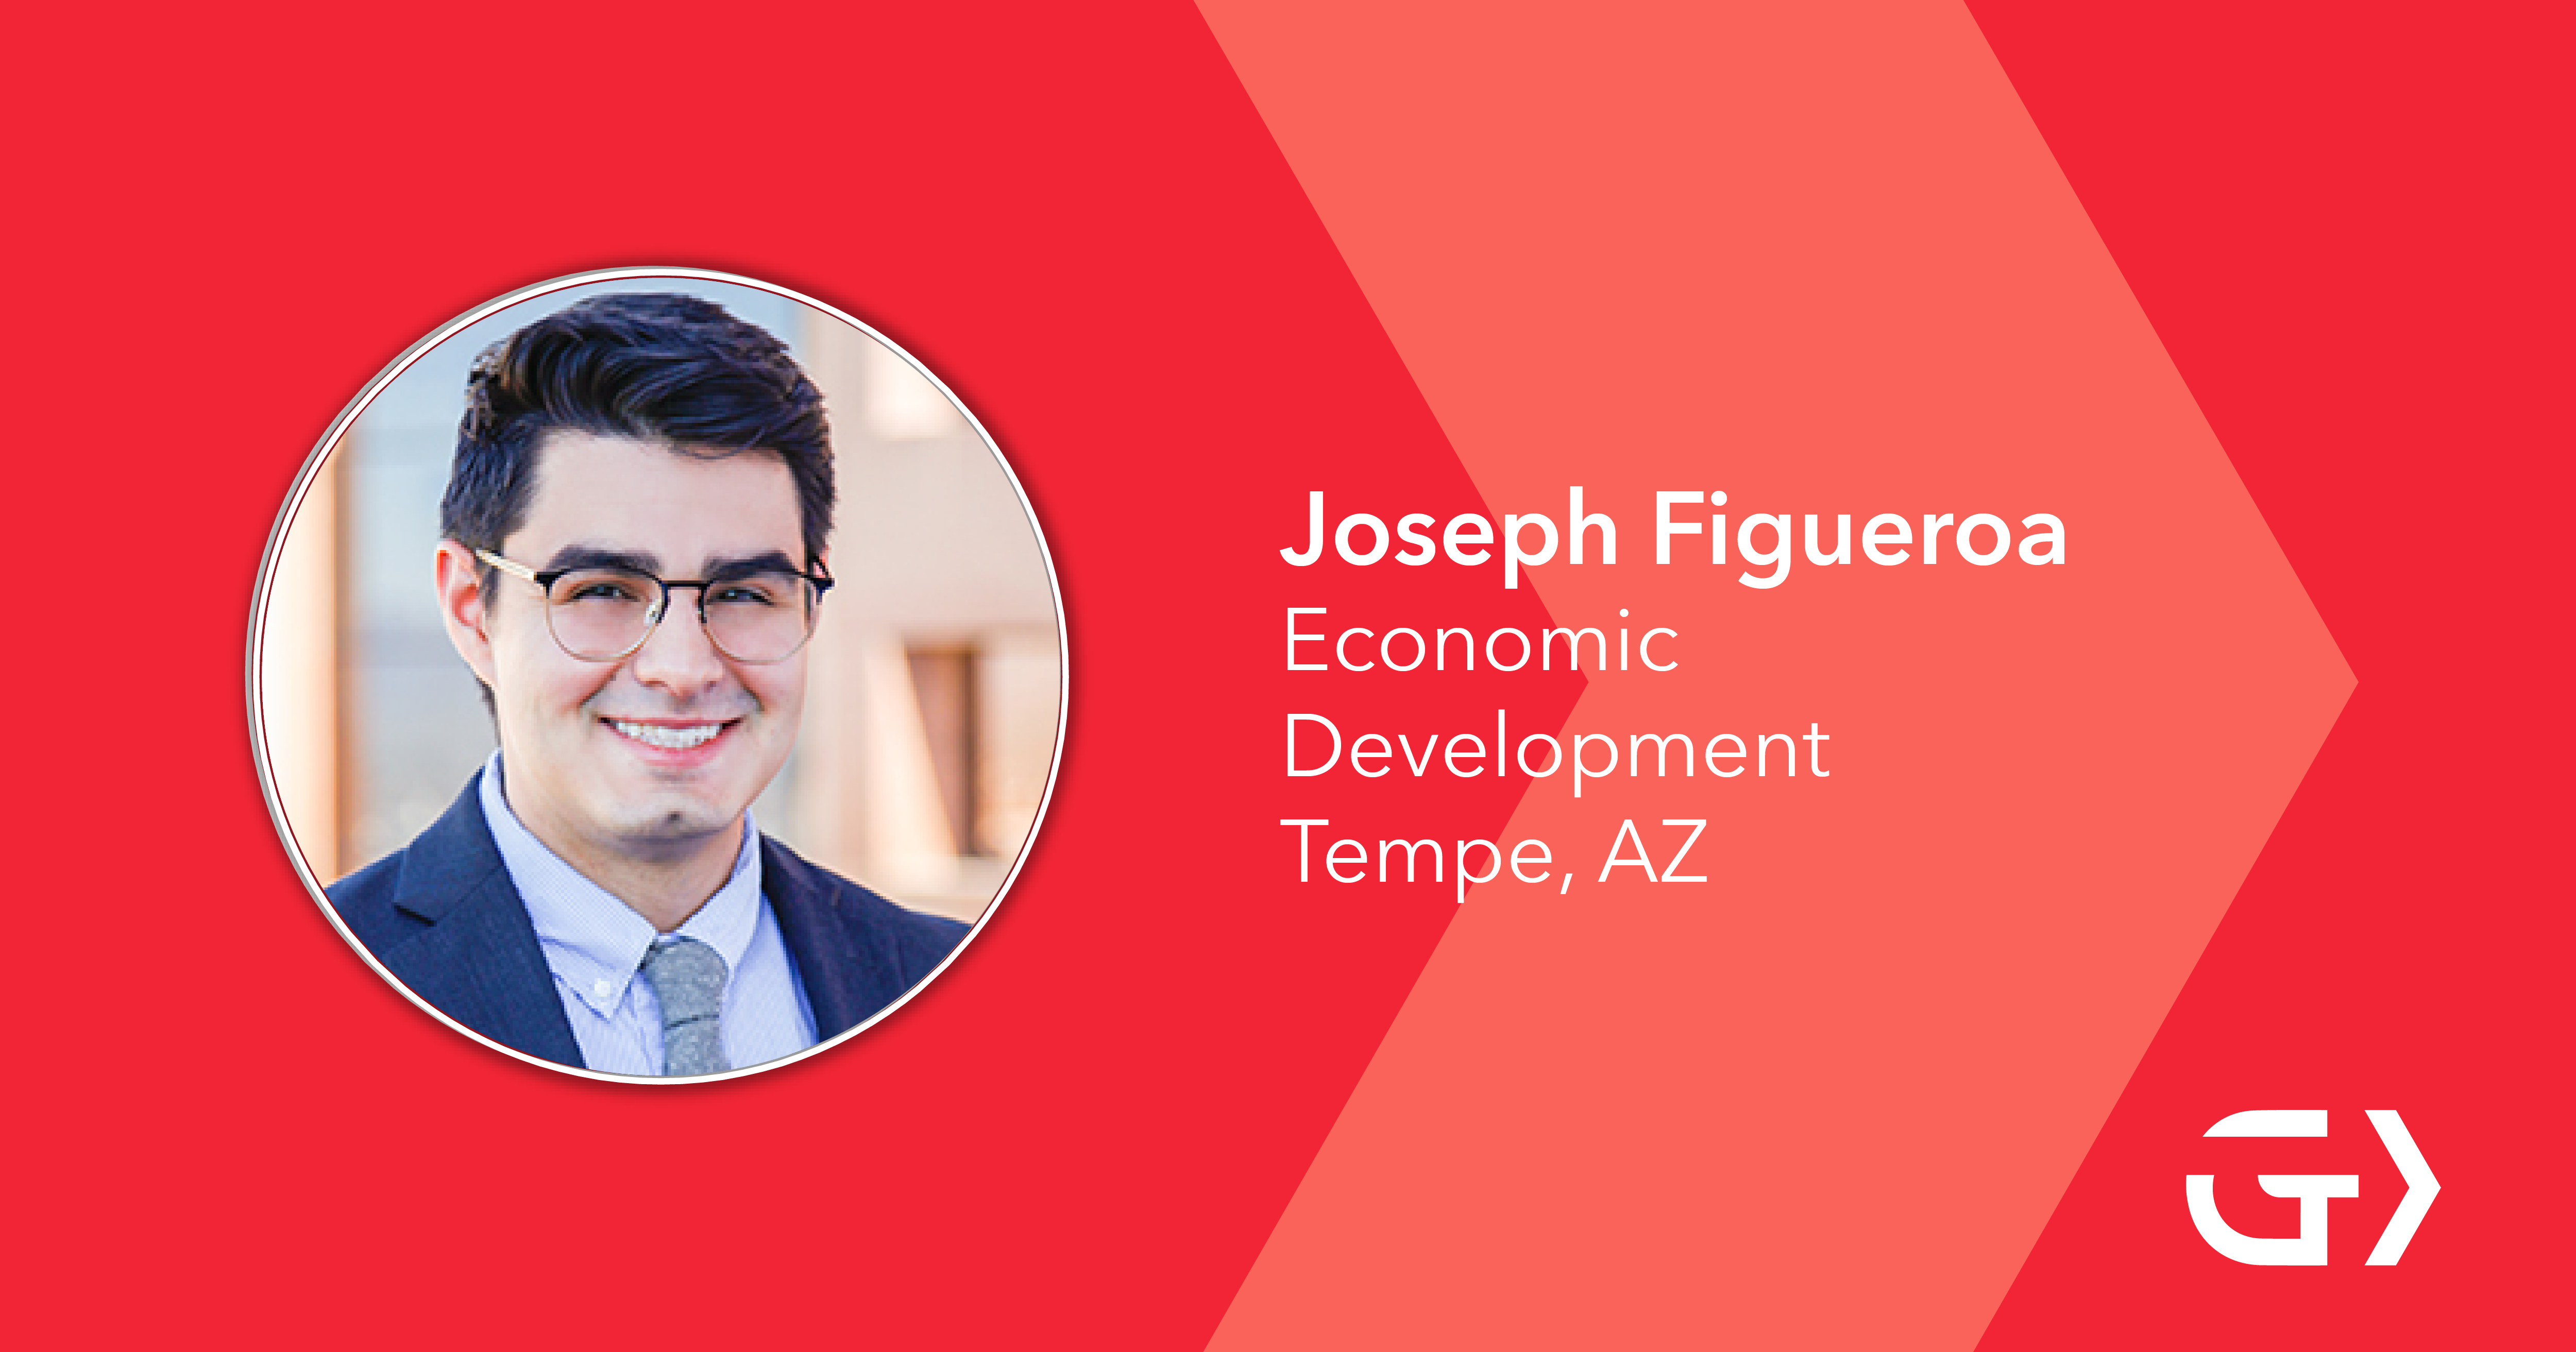 Joey Figueroa says he loves living in Greater Phoenix because there is always something fun to do. From trying a new restaurant to watching a Phoenix Suns game, Greater Phoenix is always busy.